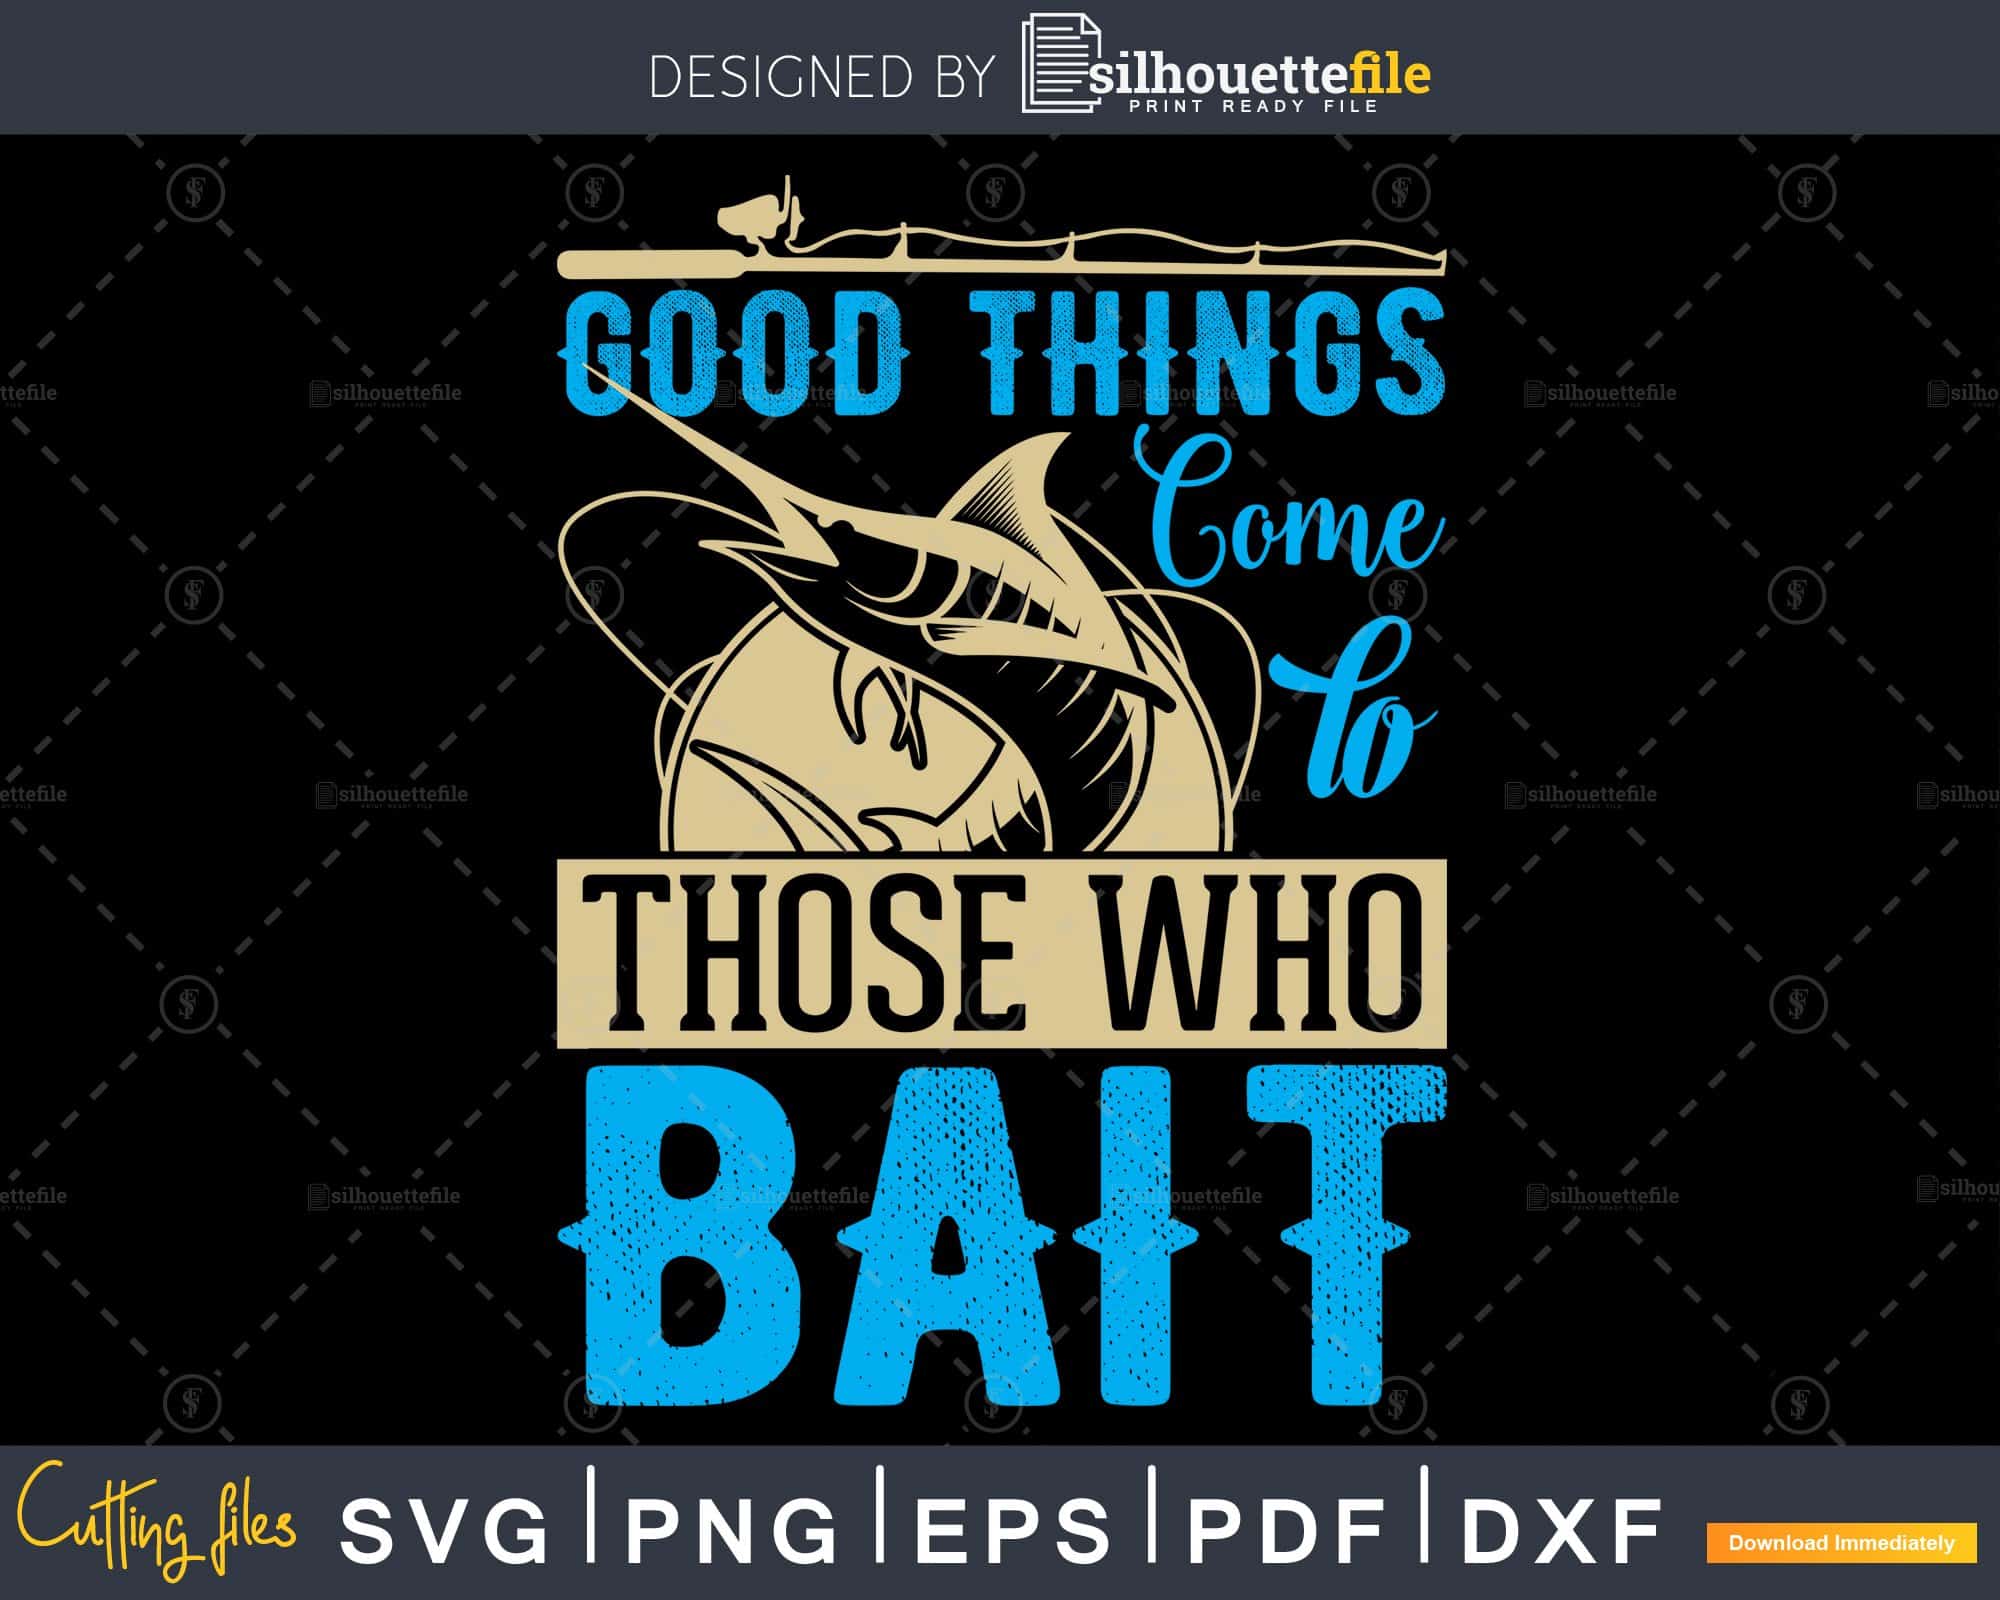 Good things come to those who bait svg design Instant download cut